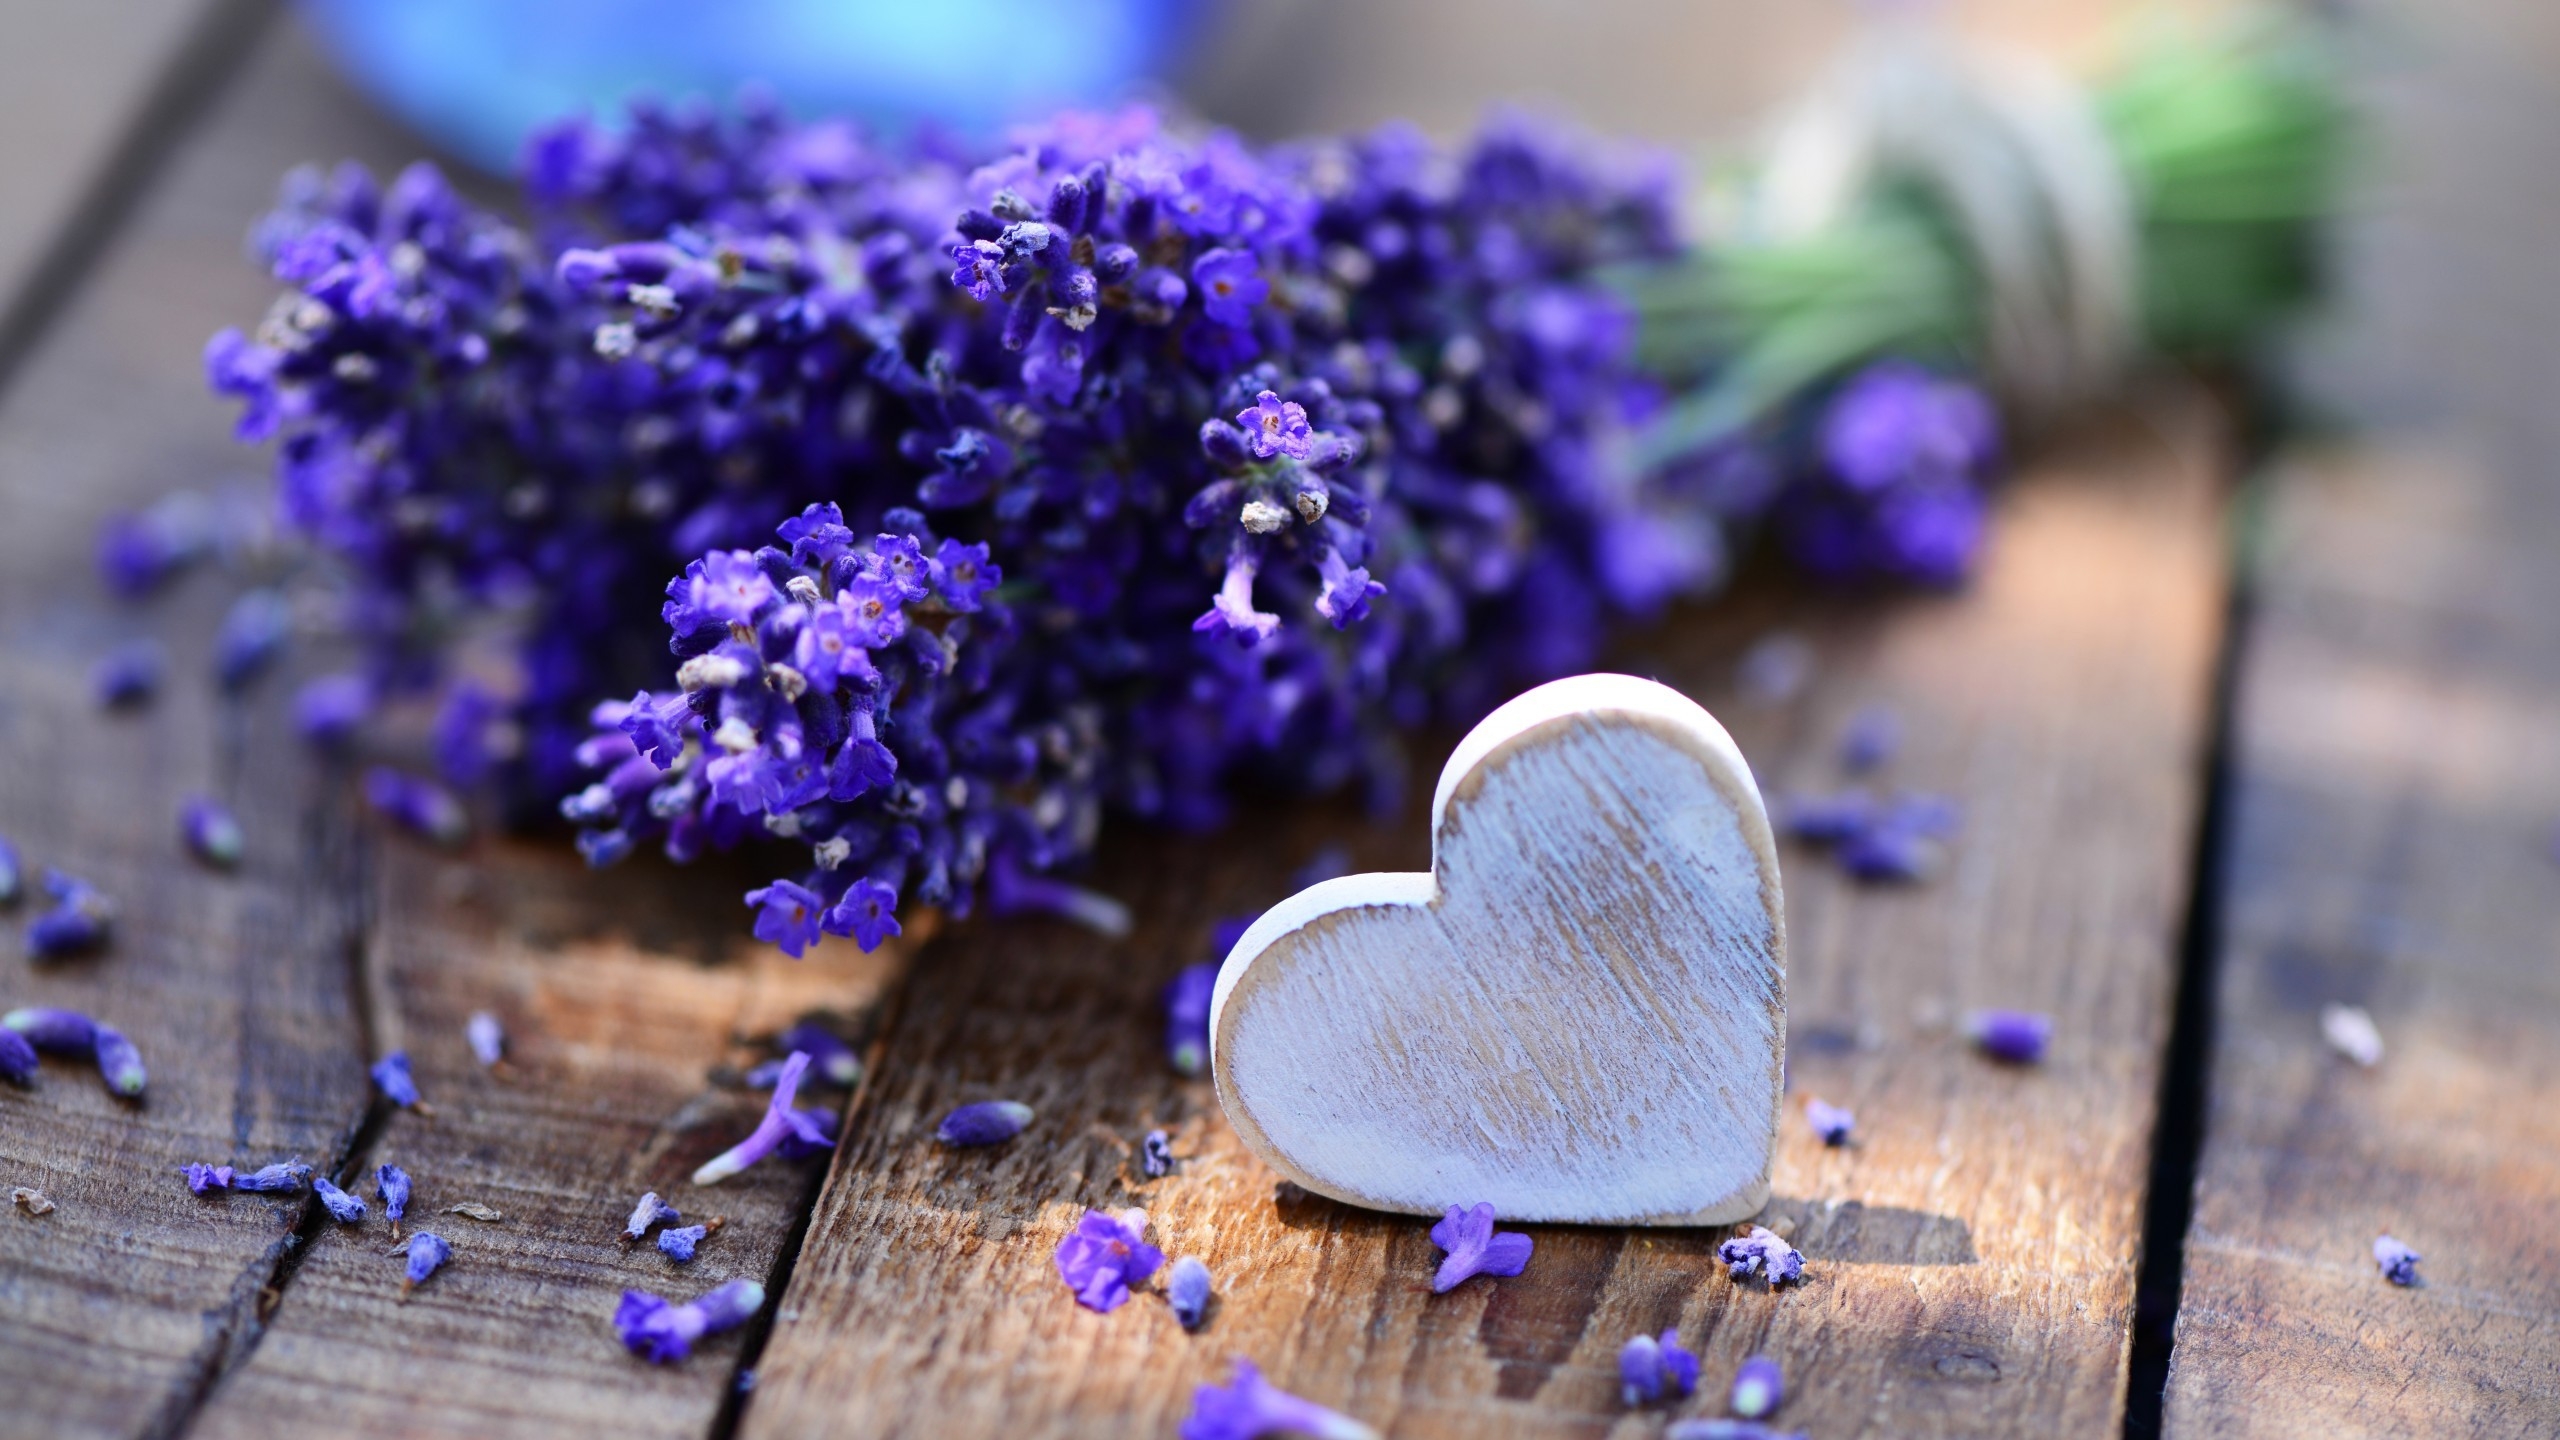 Lavender and Heart for 2560x1440 HDTV resolution